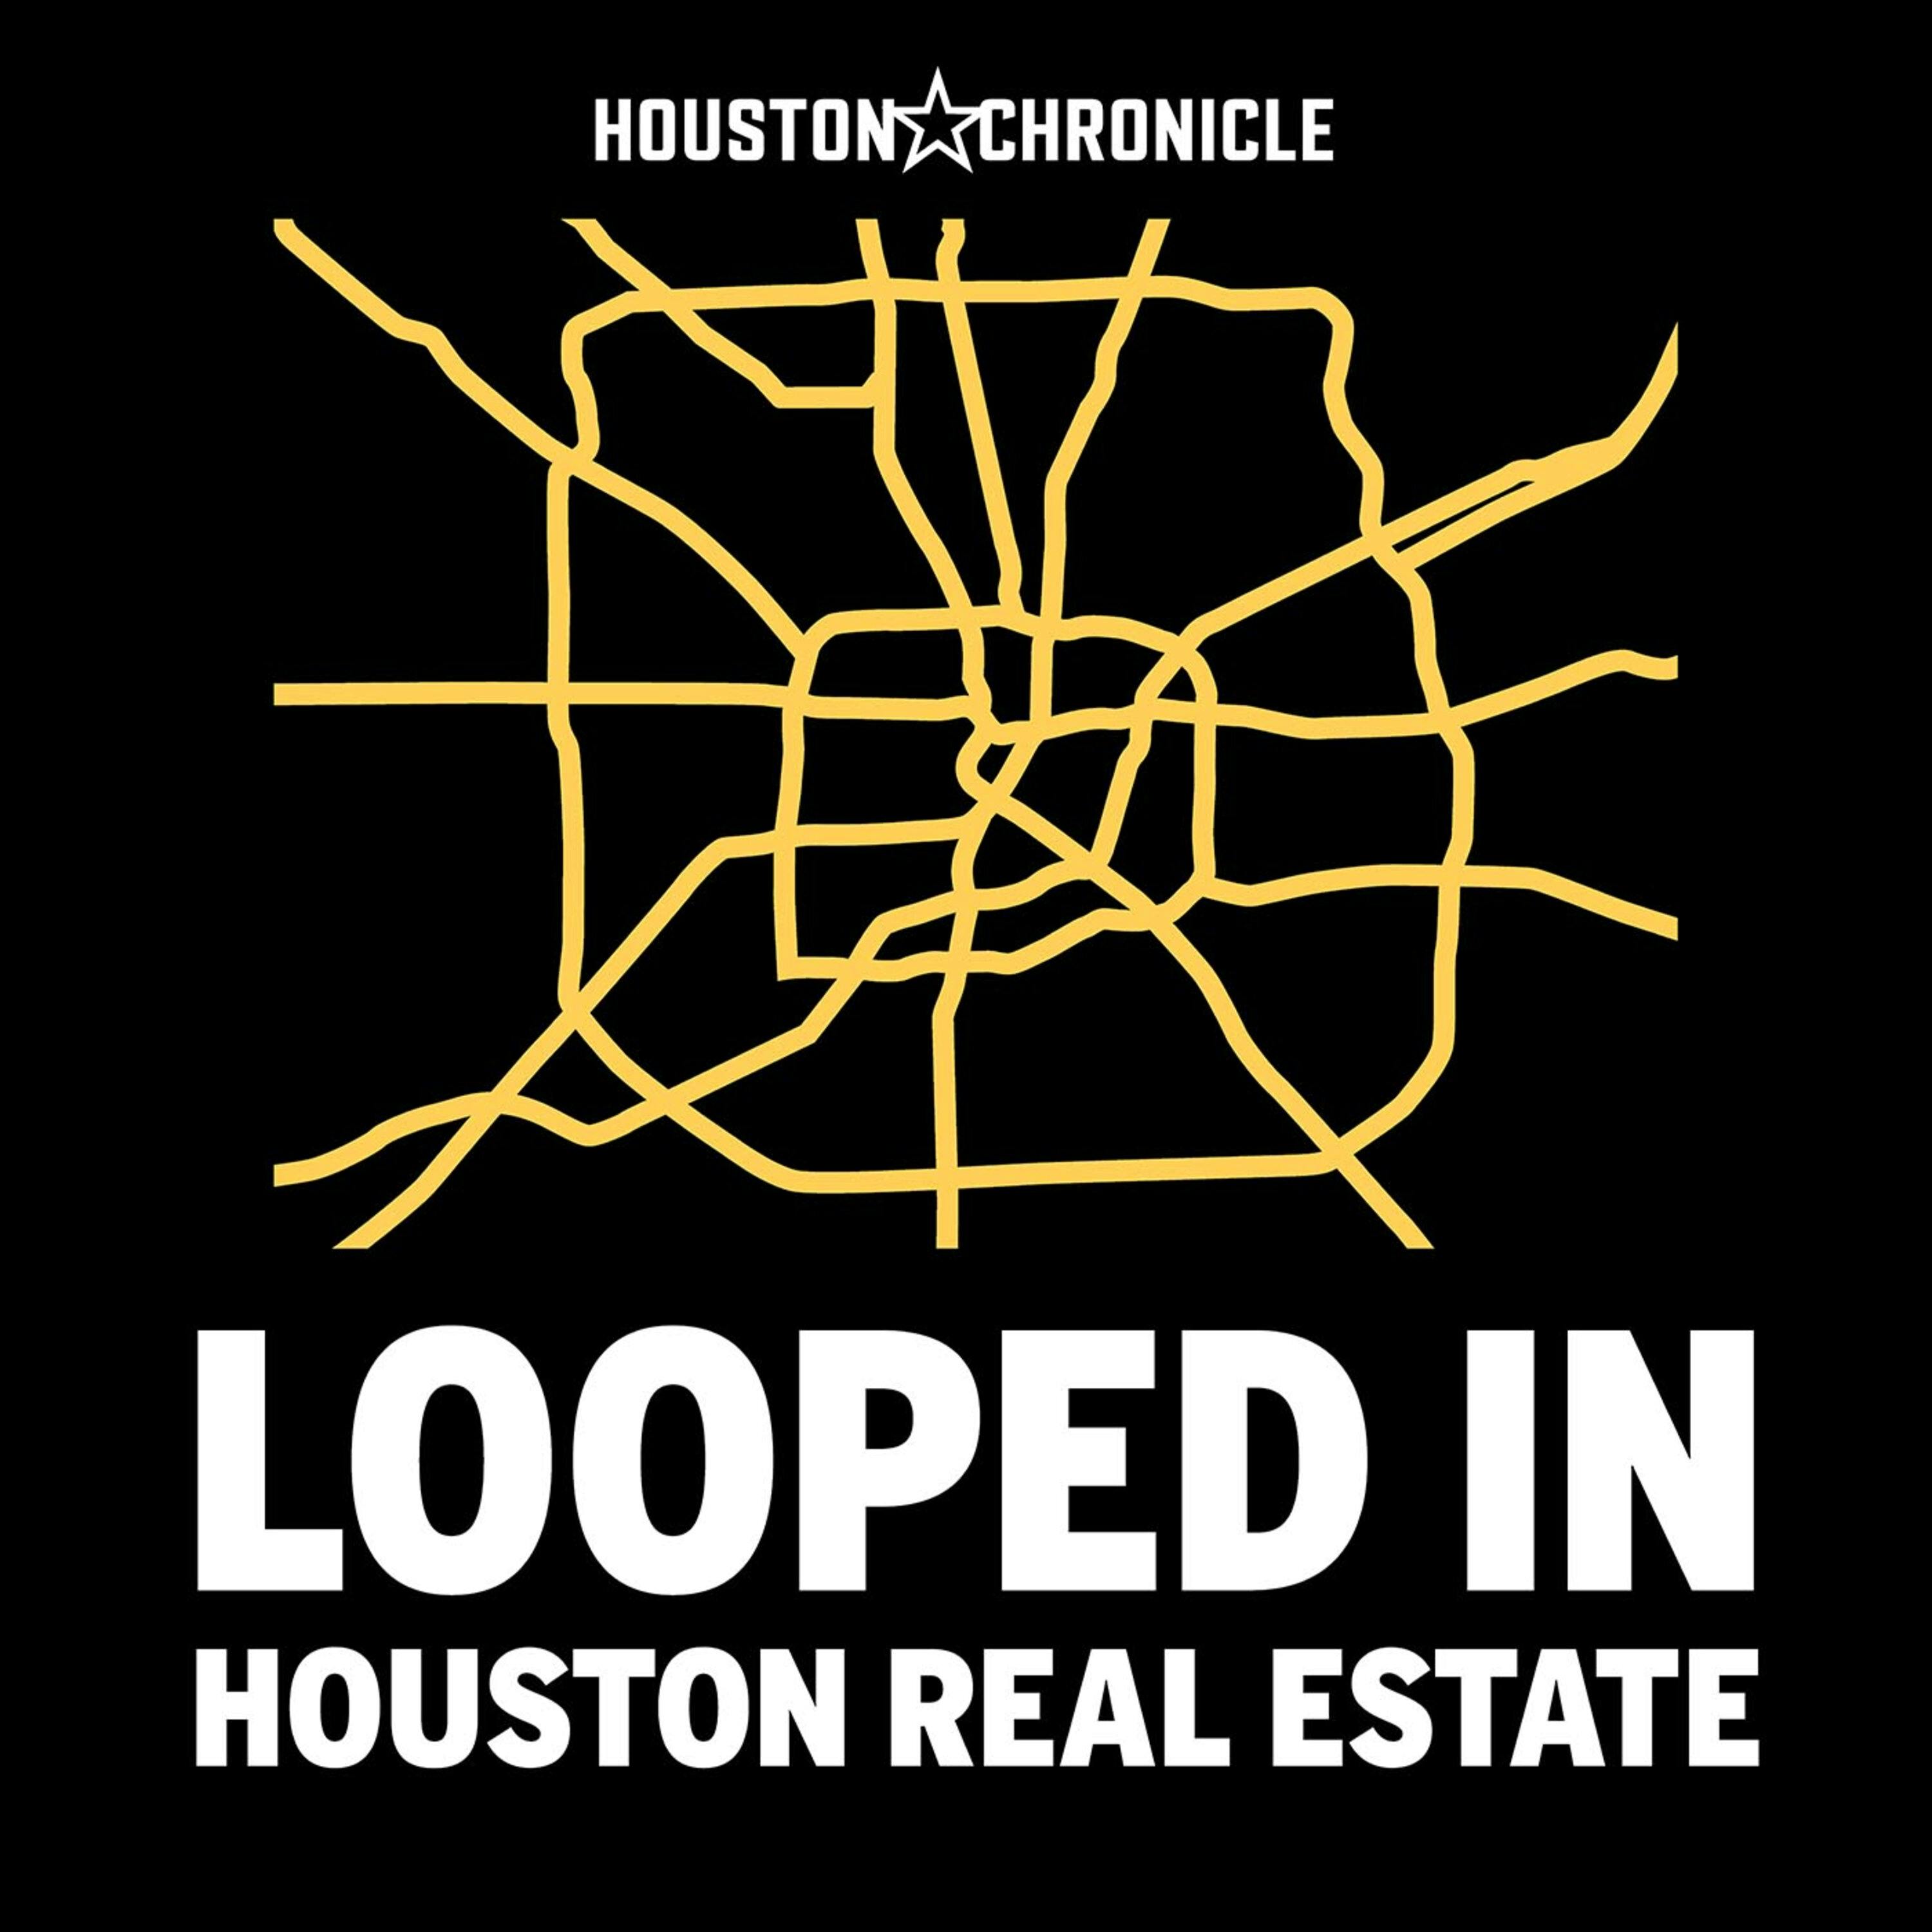 Houston's biggest eviction prevention effort is ending. What lessons can we learn?